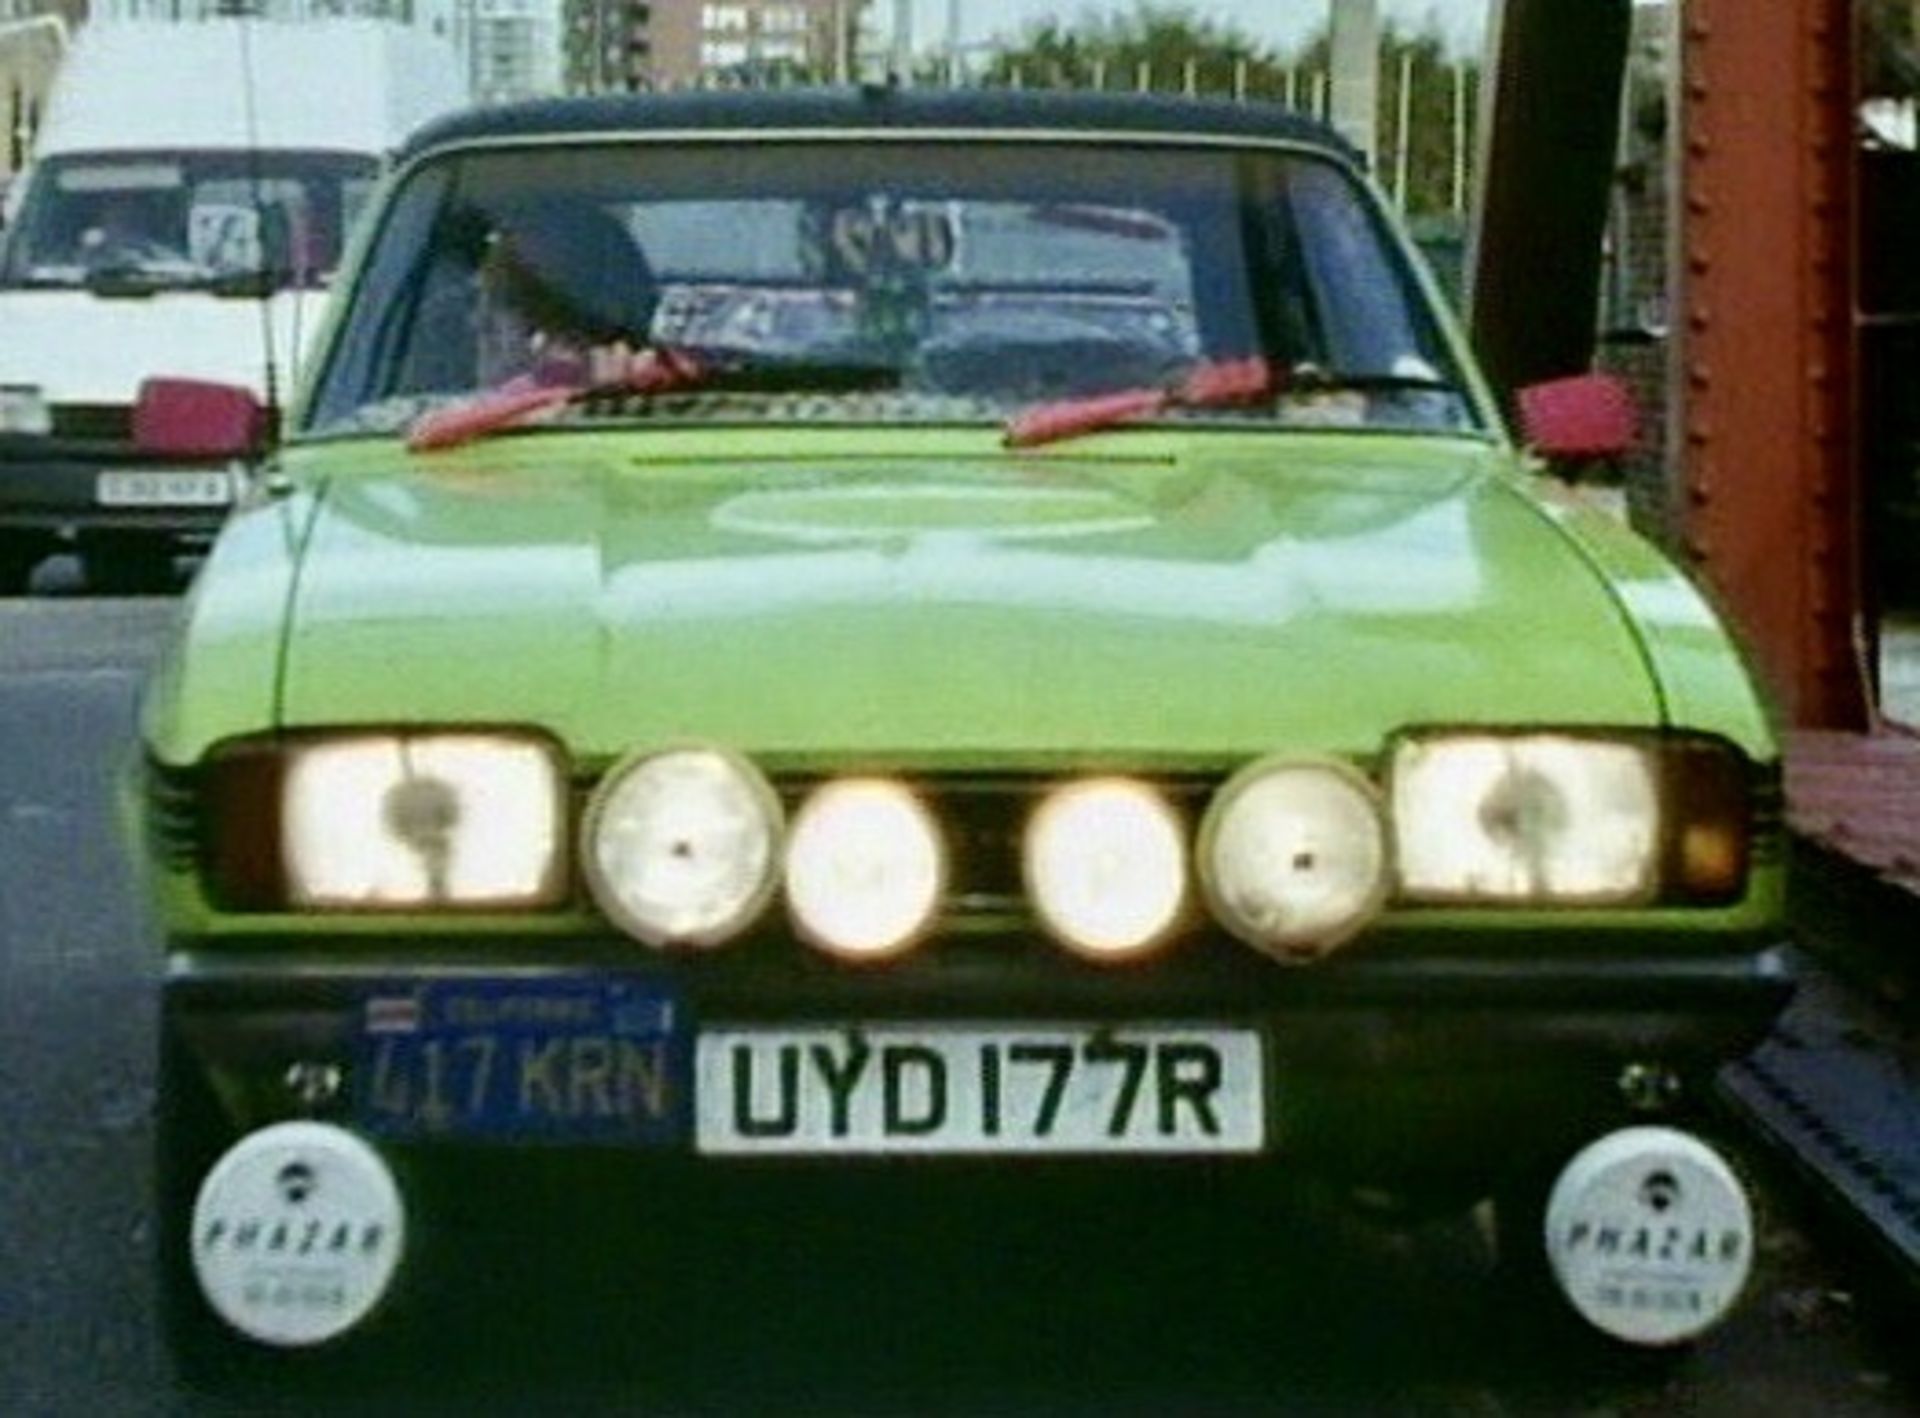 ONLY FOOLS & HORSES - DEL'S CAPRI GHIA - SIGNED LIGHT COVER - Image 7 of 7